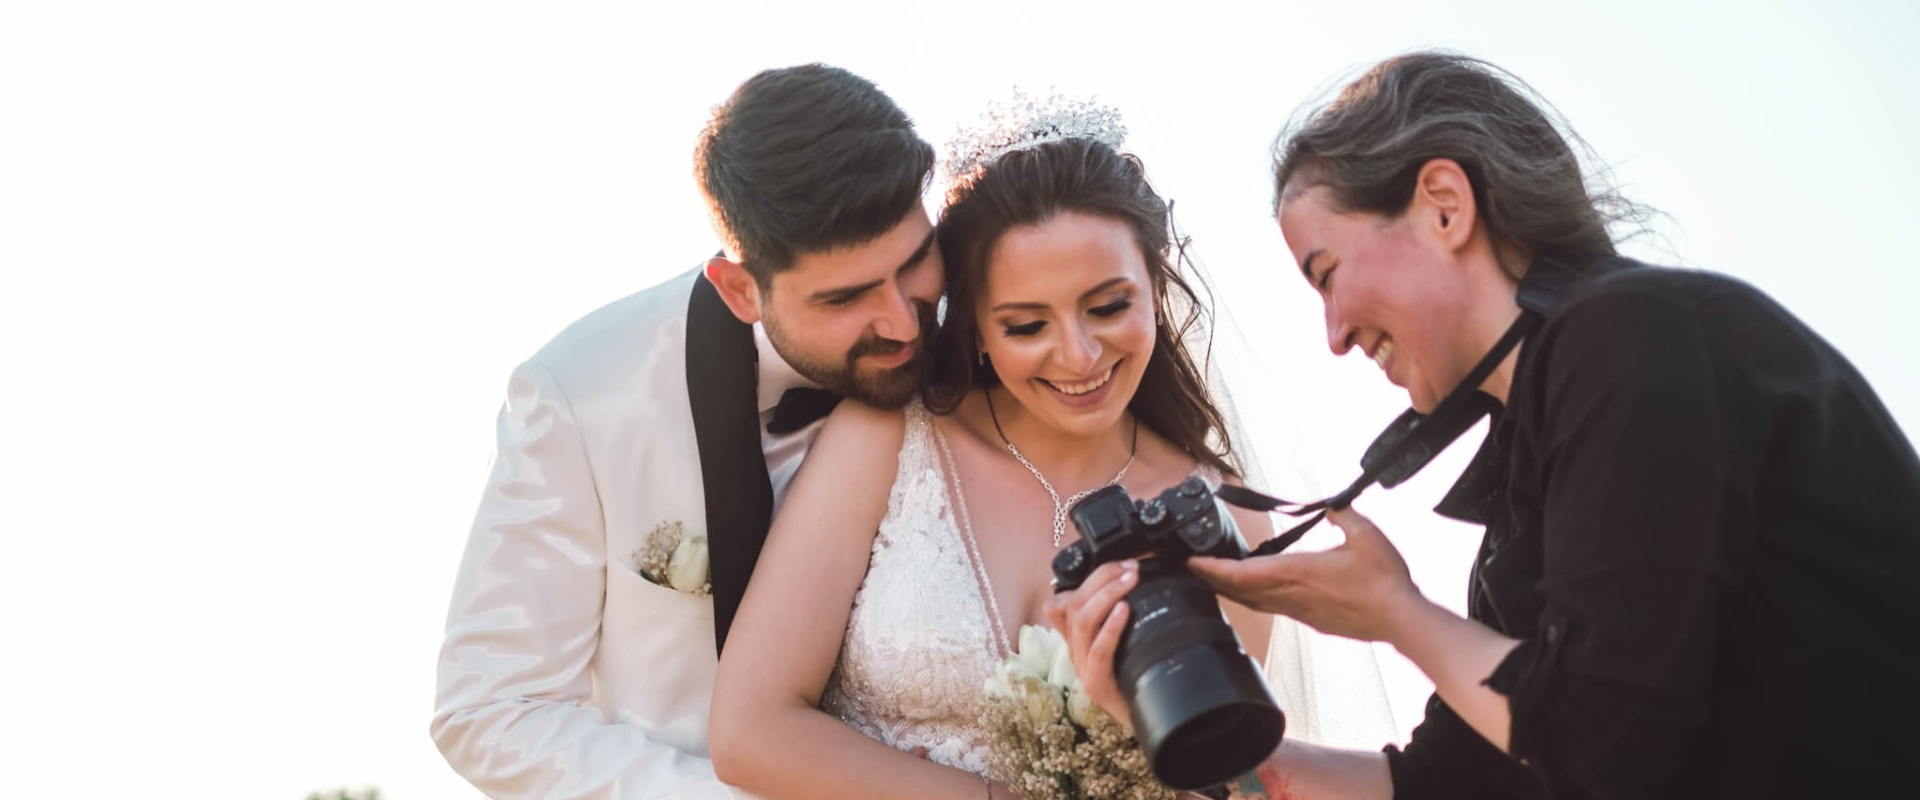 Understanding Copyright and Usage Rights for Wedding Photos